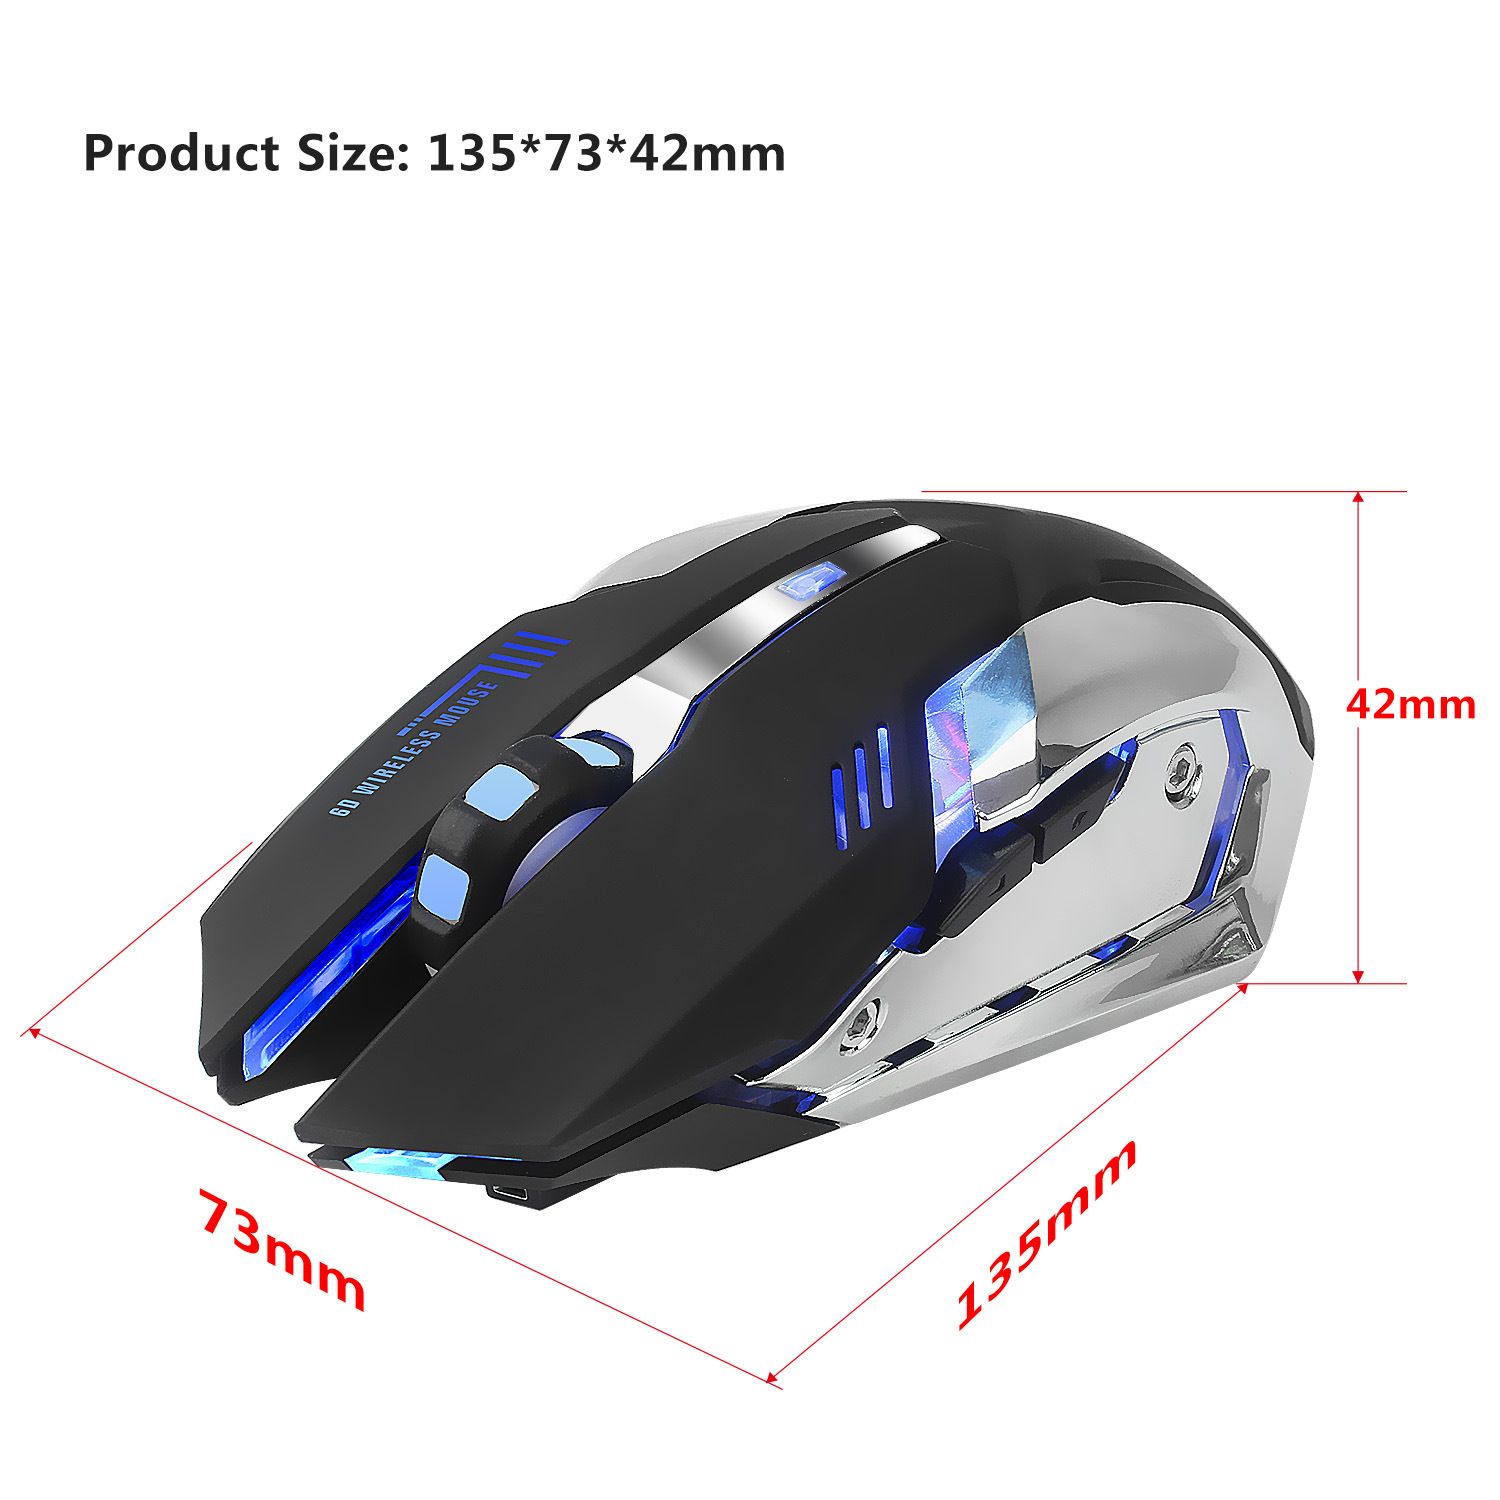 HXSJ-M10-Wireless-24GHz-Gaming-Mouse-Ergonomic-Colors-Backlight-Gaming-Mouse-2400DPI-Mice-1397825